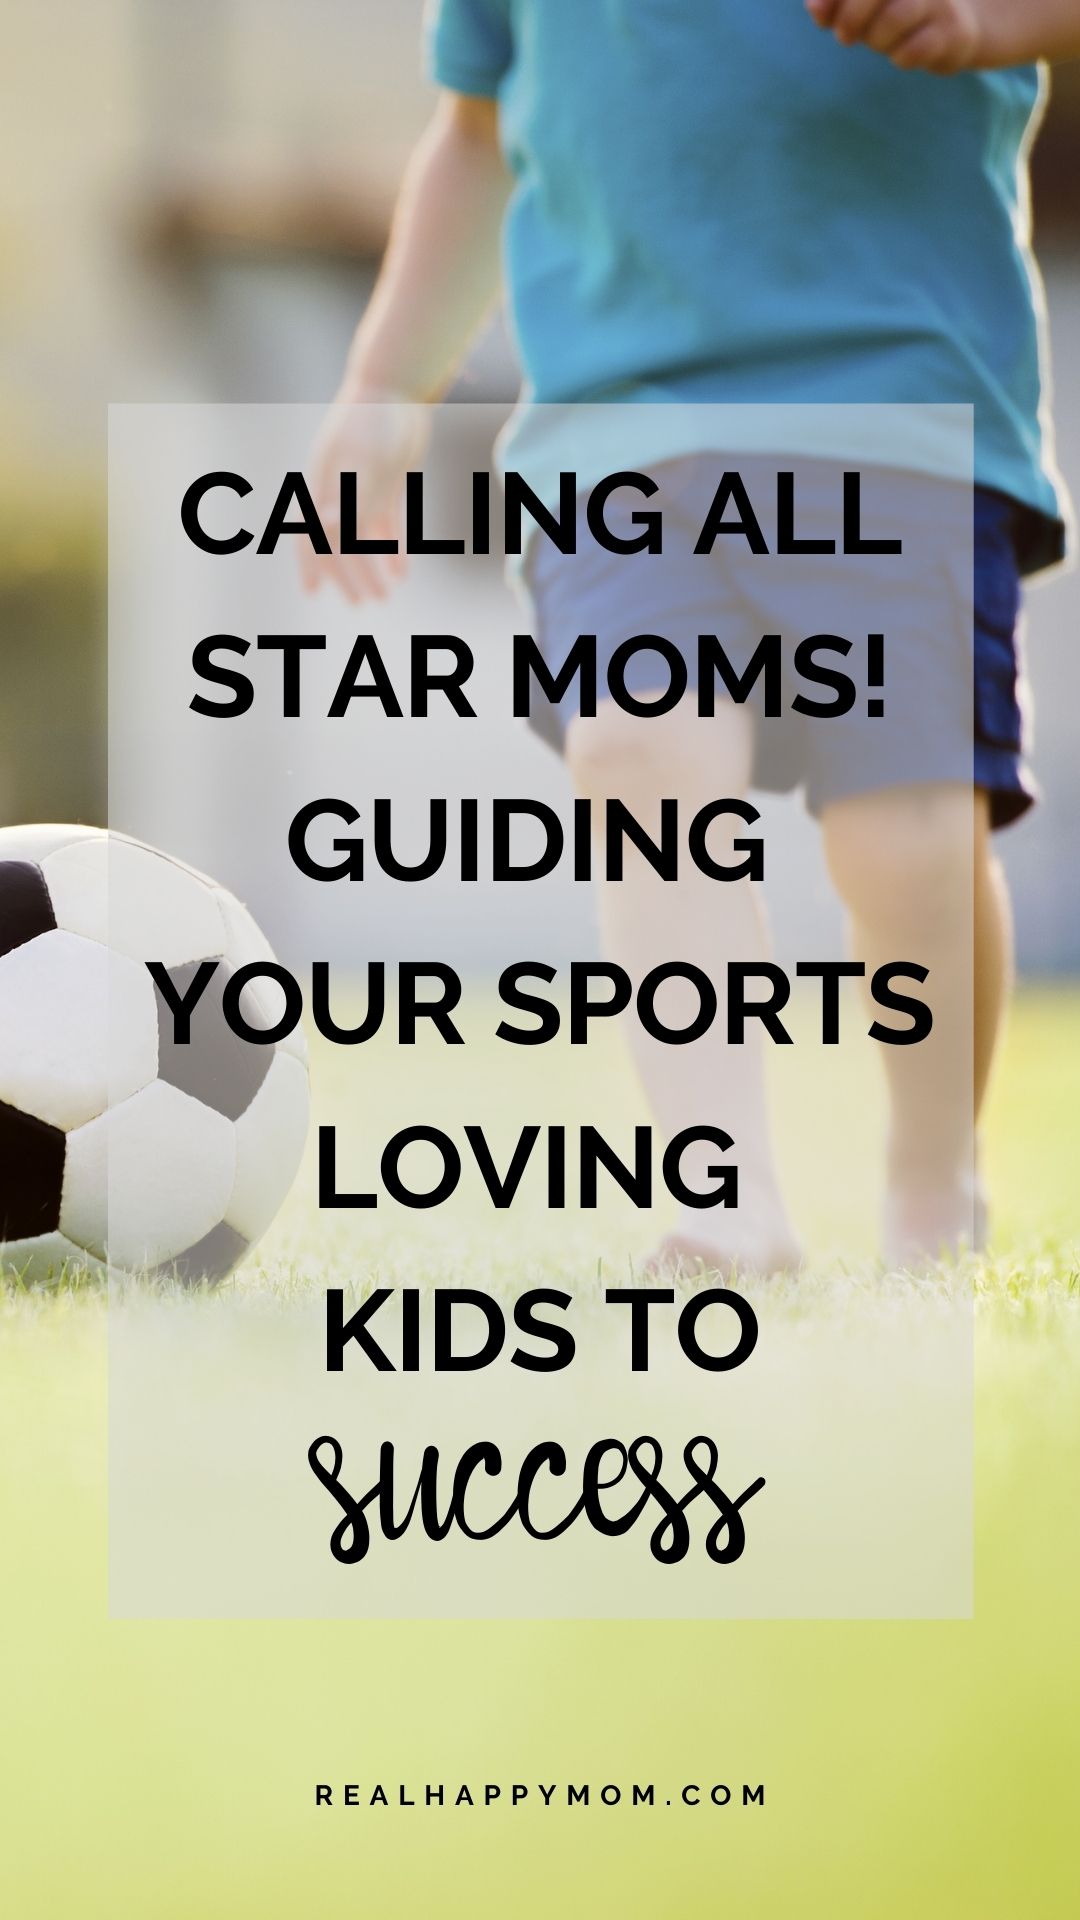 Calling All Star Moms!!! Guiding Your Sports Loving Kids to Success